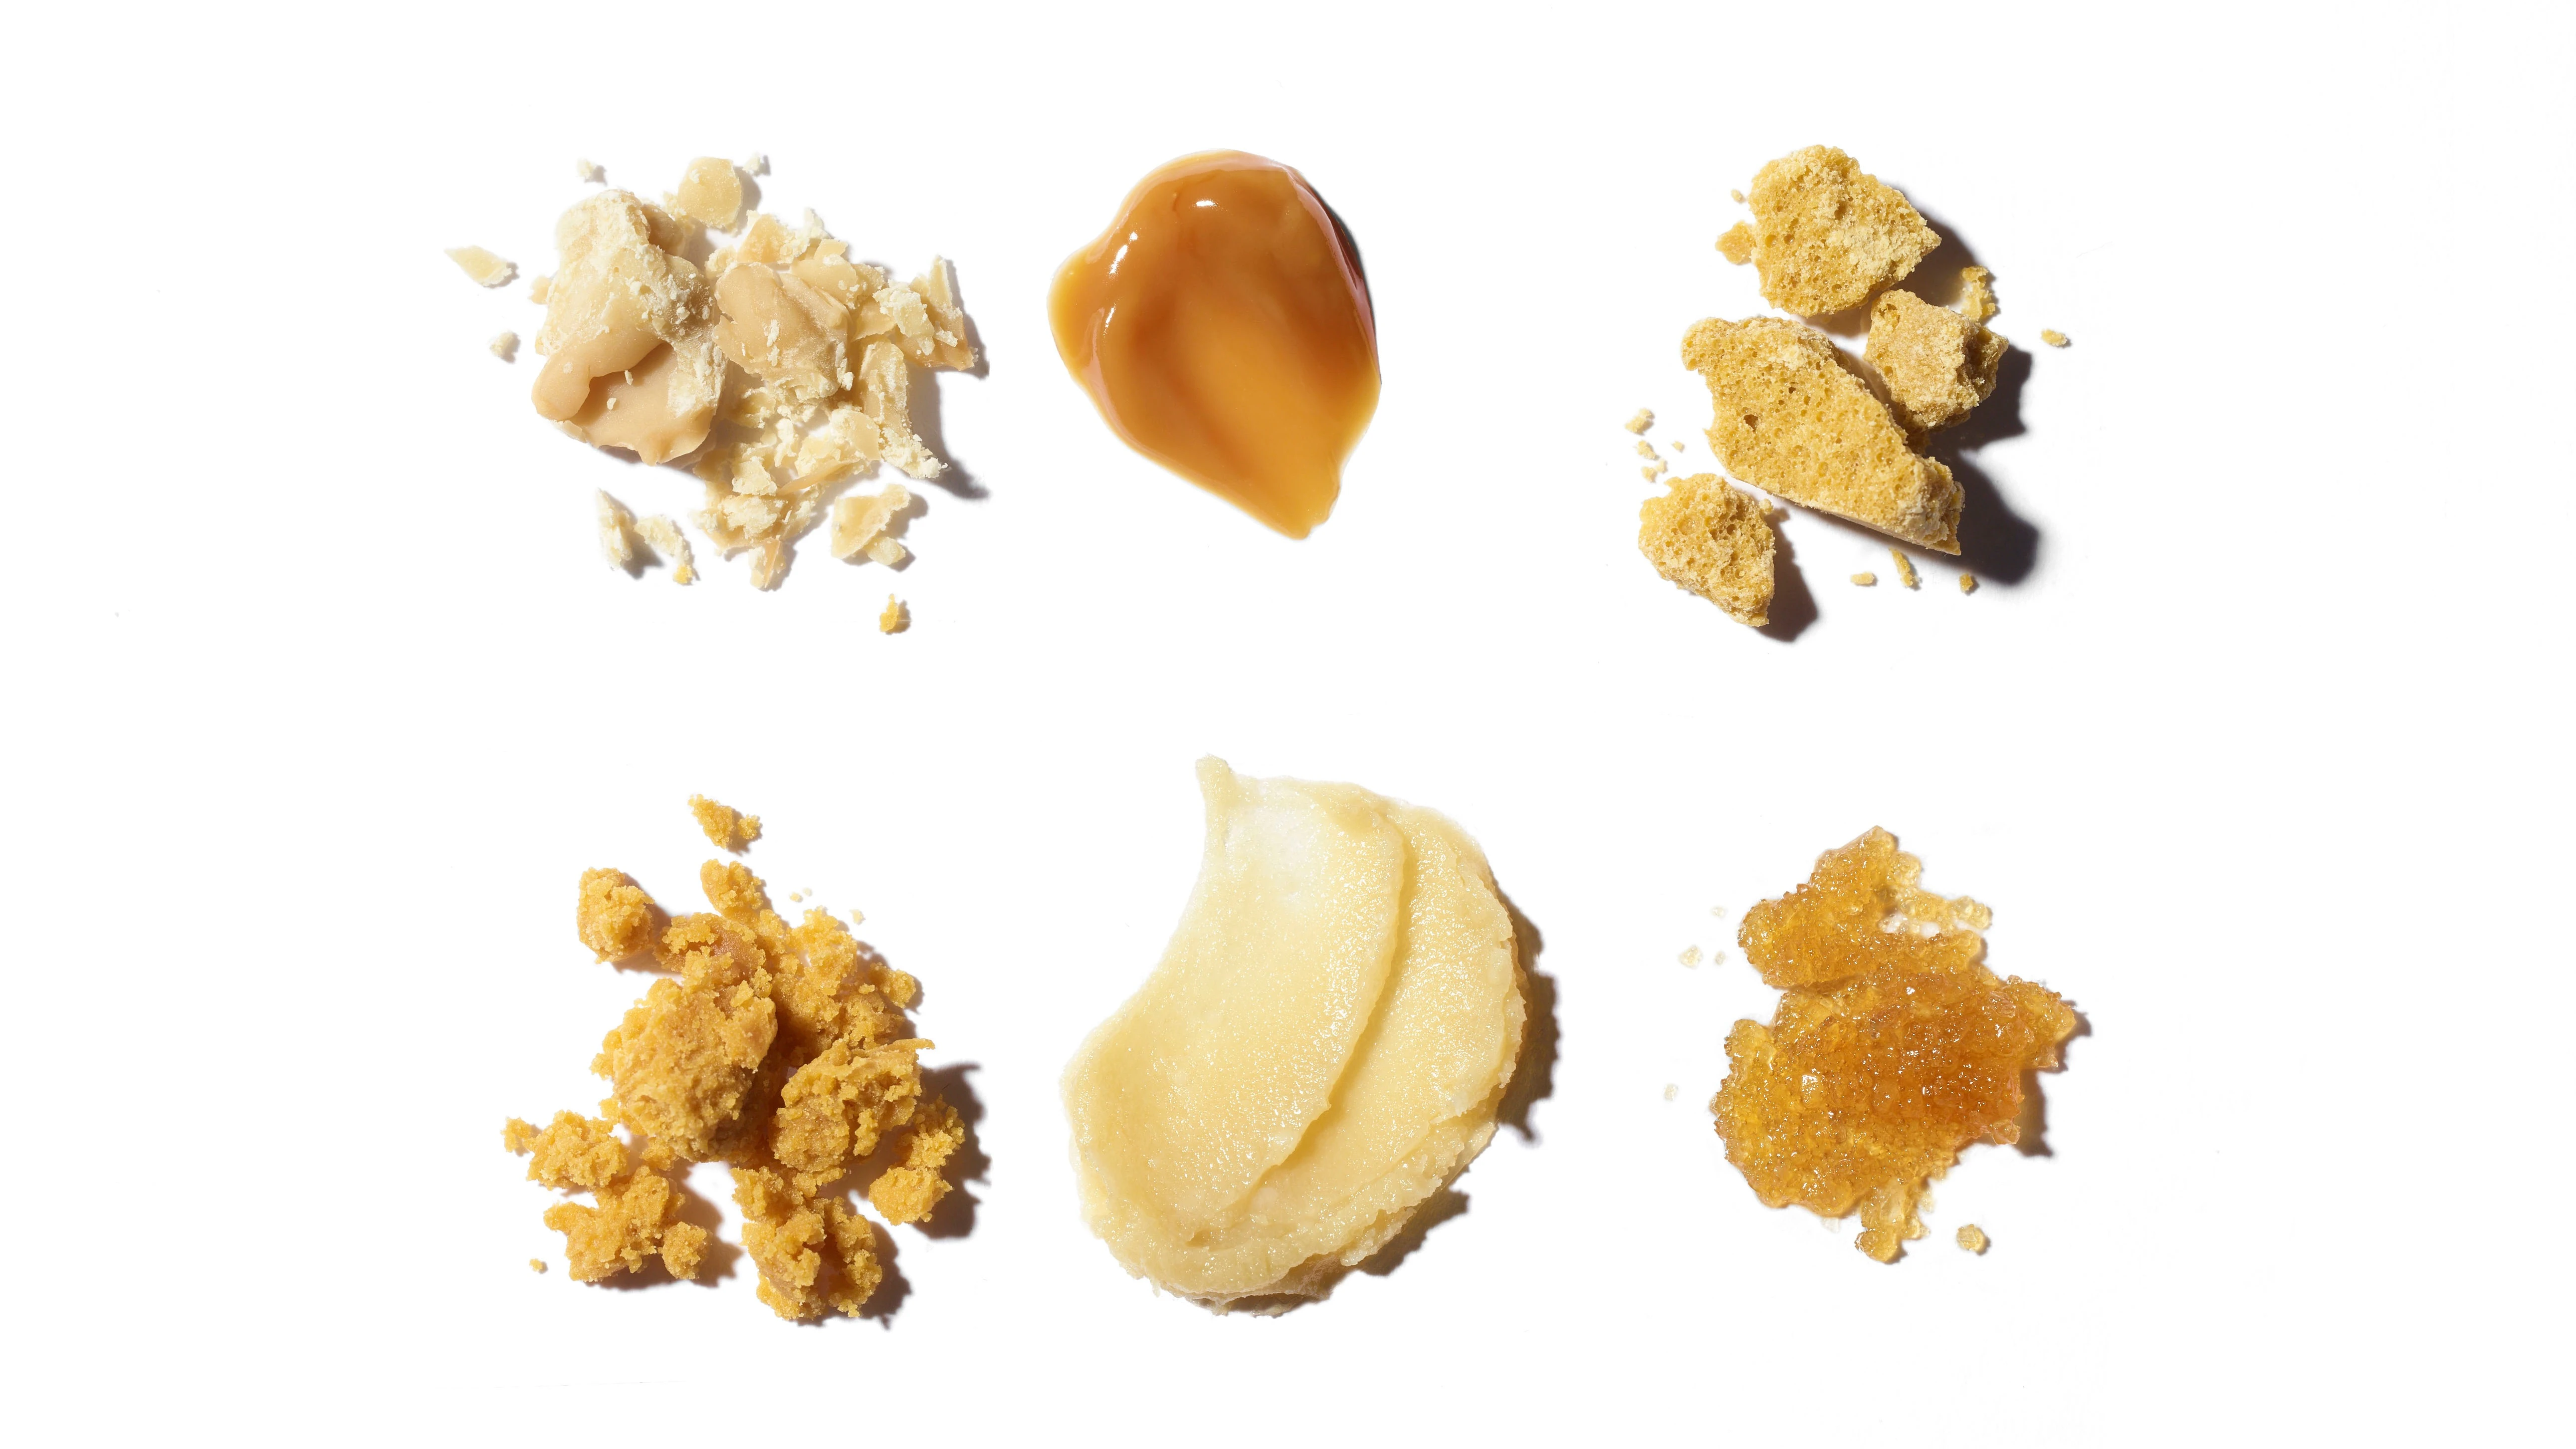 Cannabis Flower Vs Dabs: The Major Things To Consider